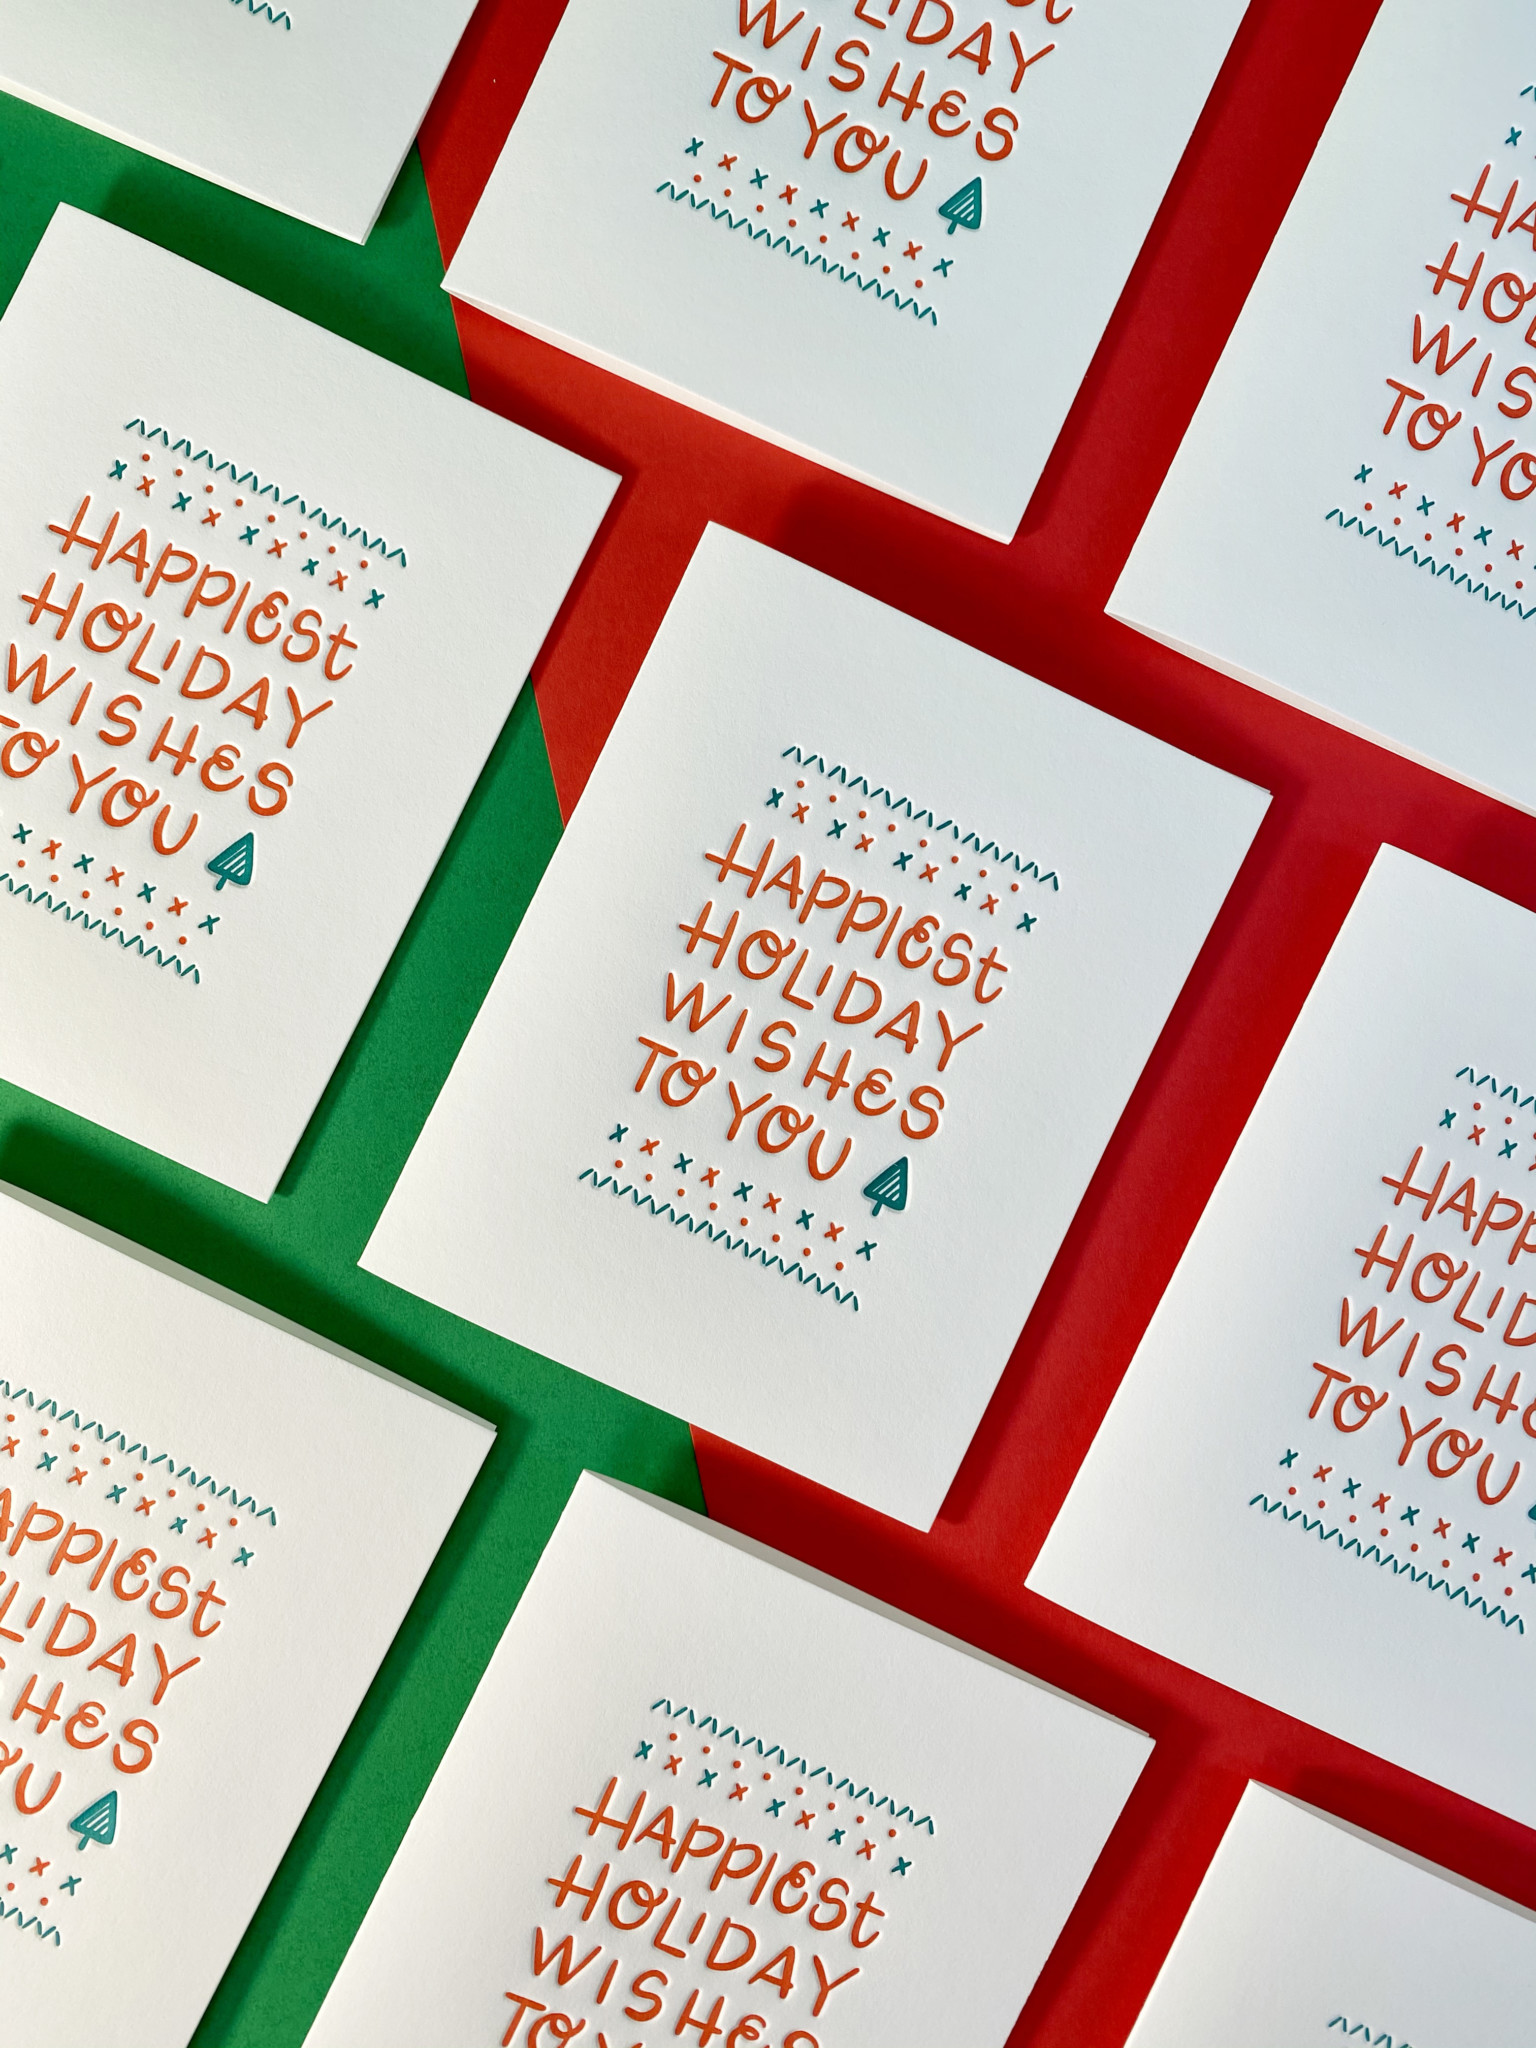 Grid of greeting cards in the same style over red & green background. Card reads, "Happiest Holiday Wishes to You"